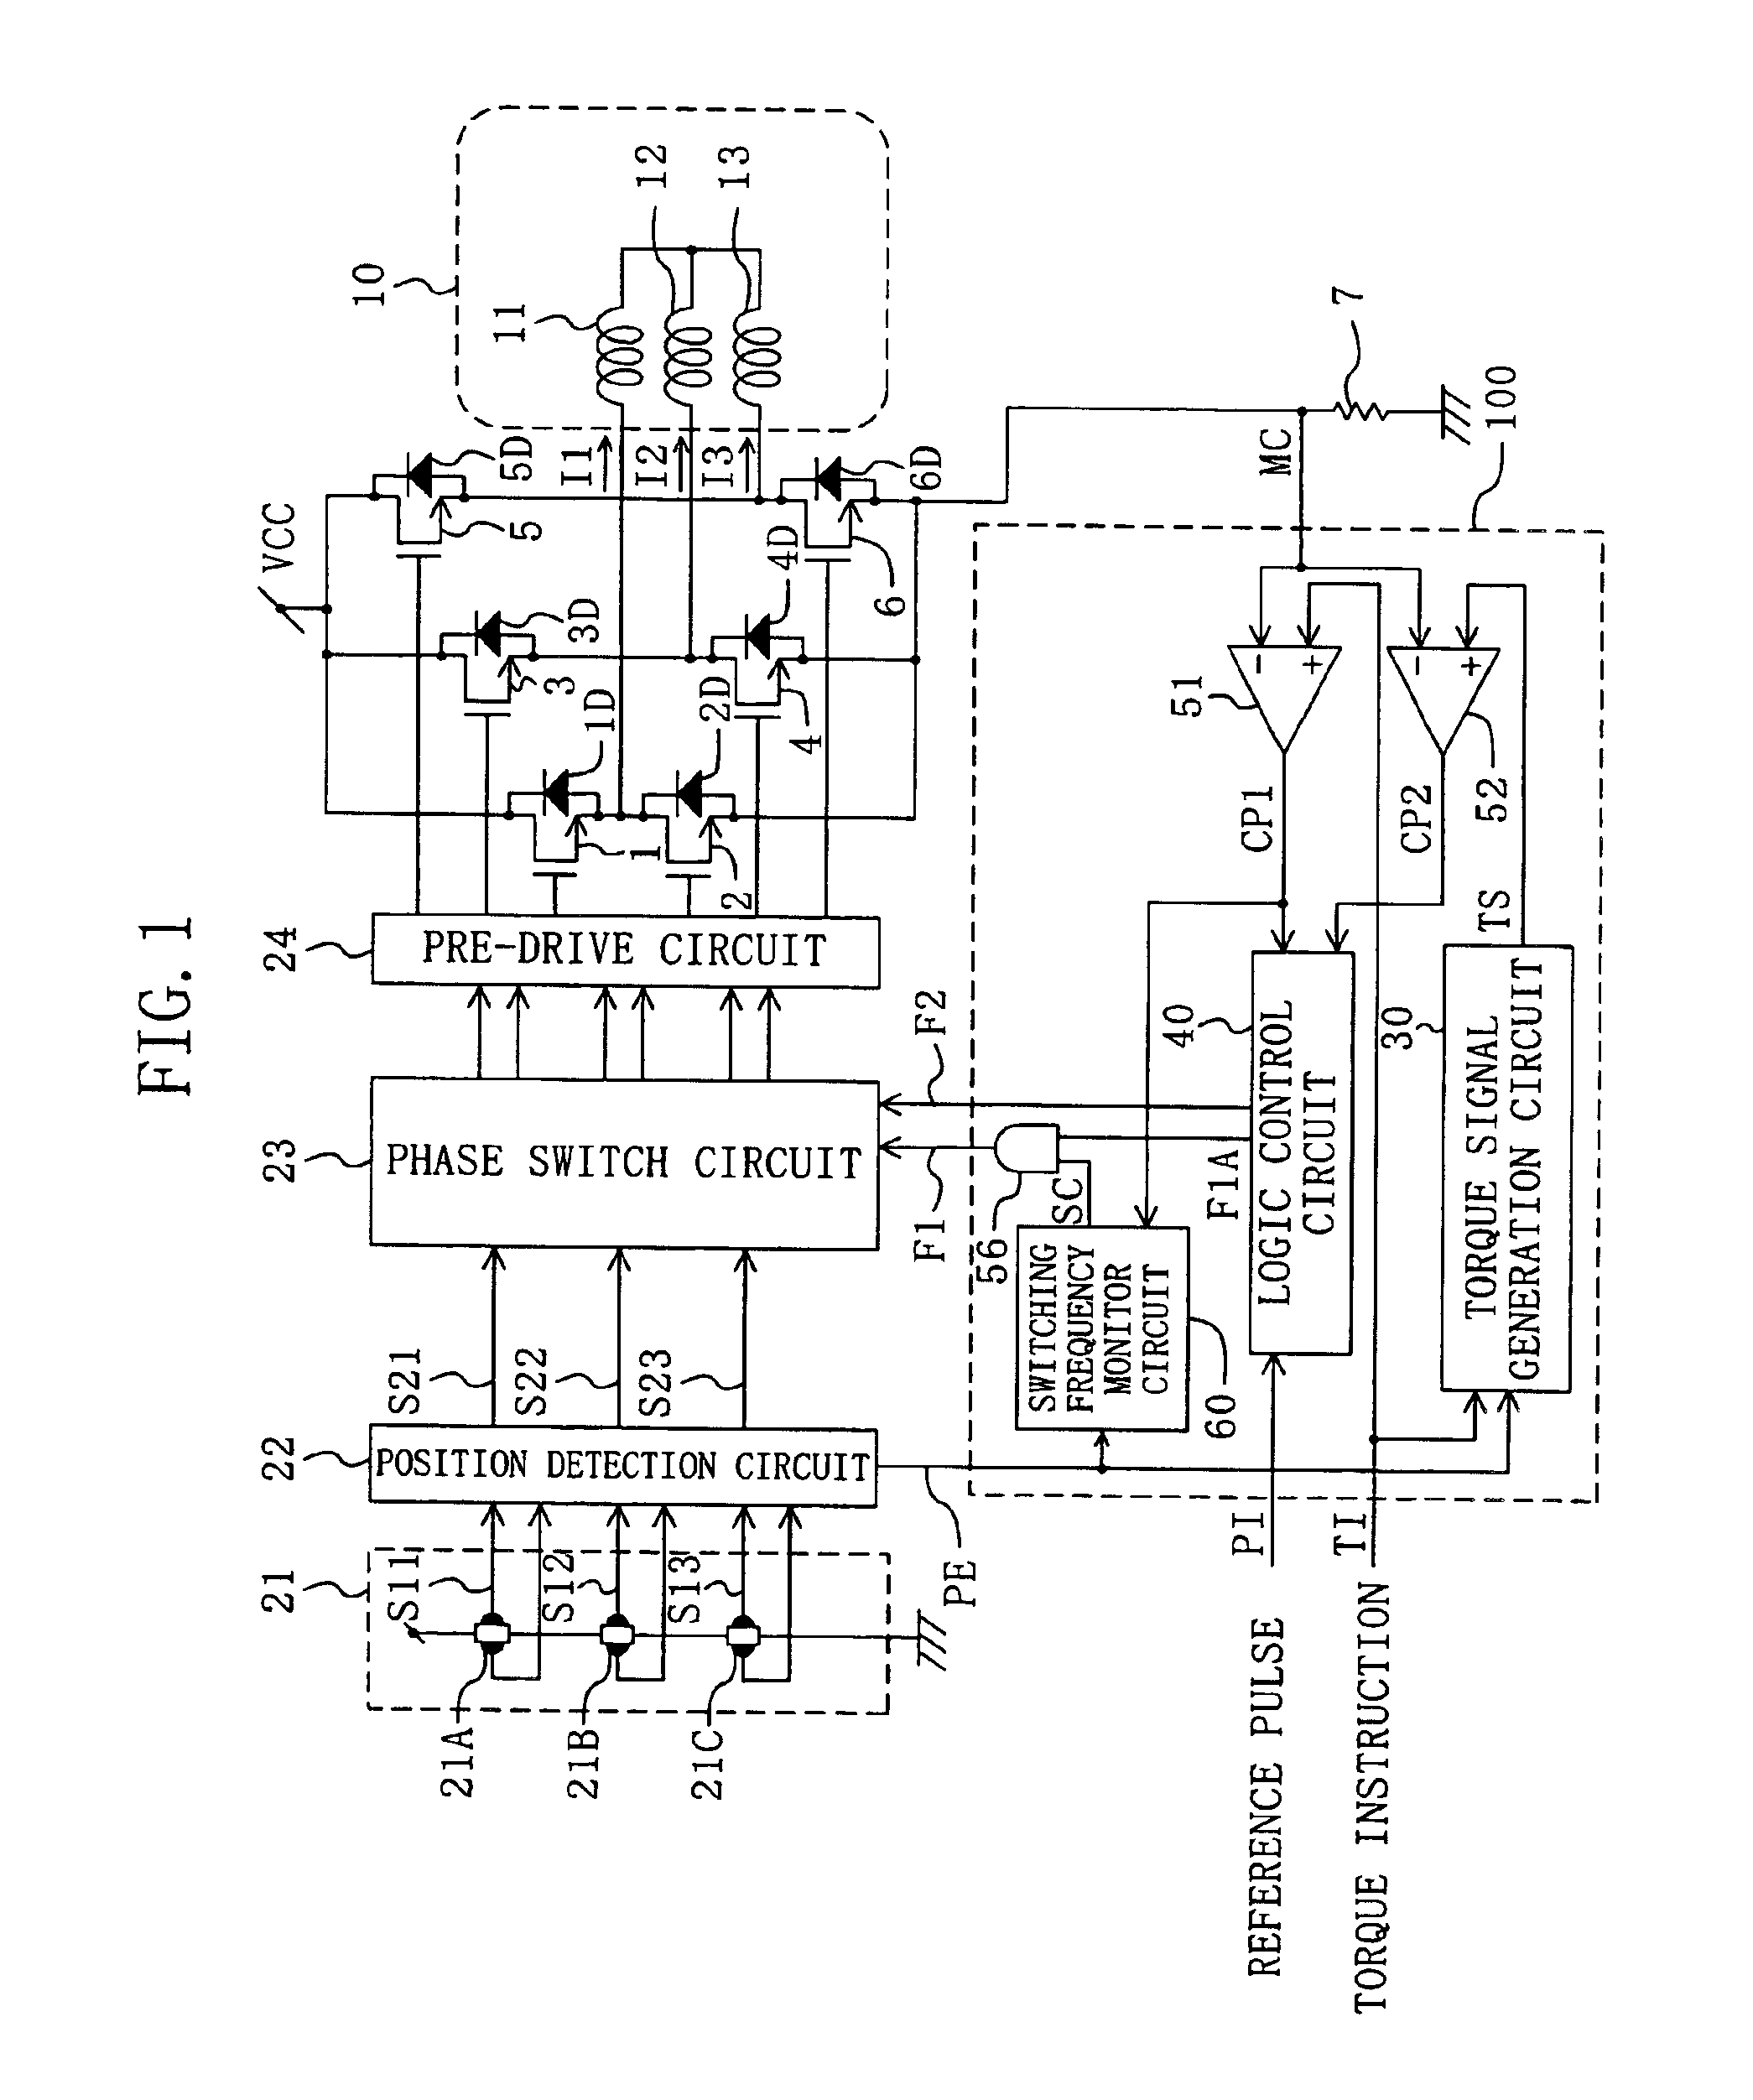 PWM controlled motor drive